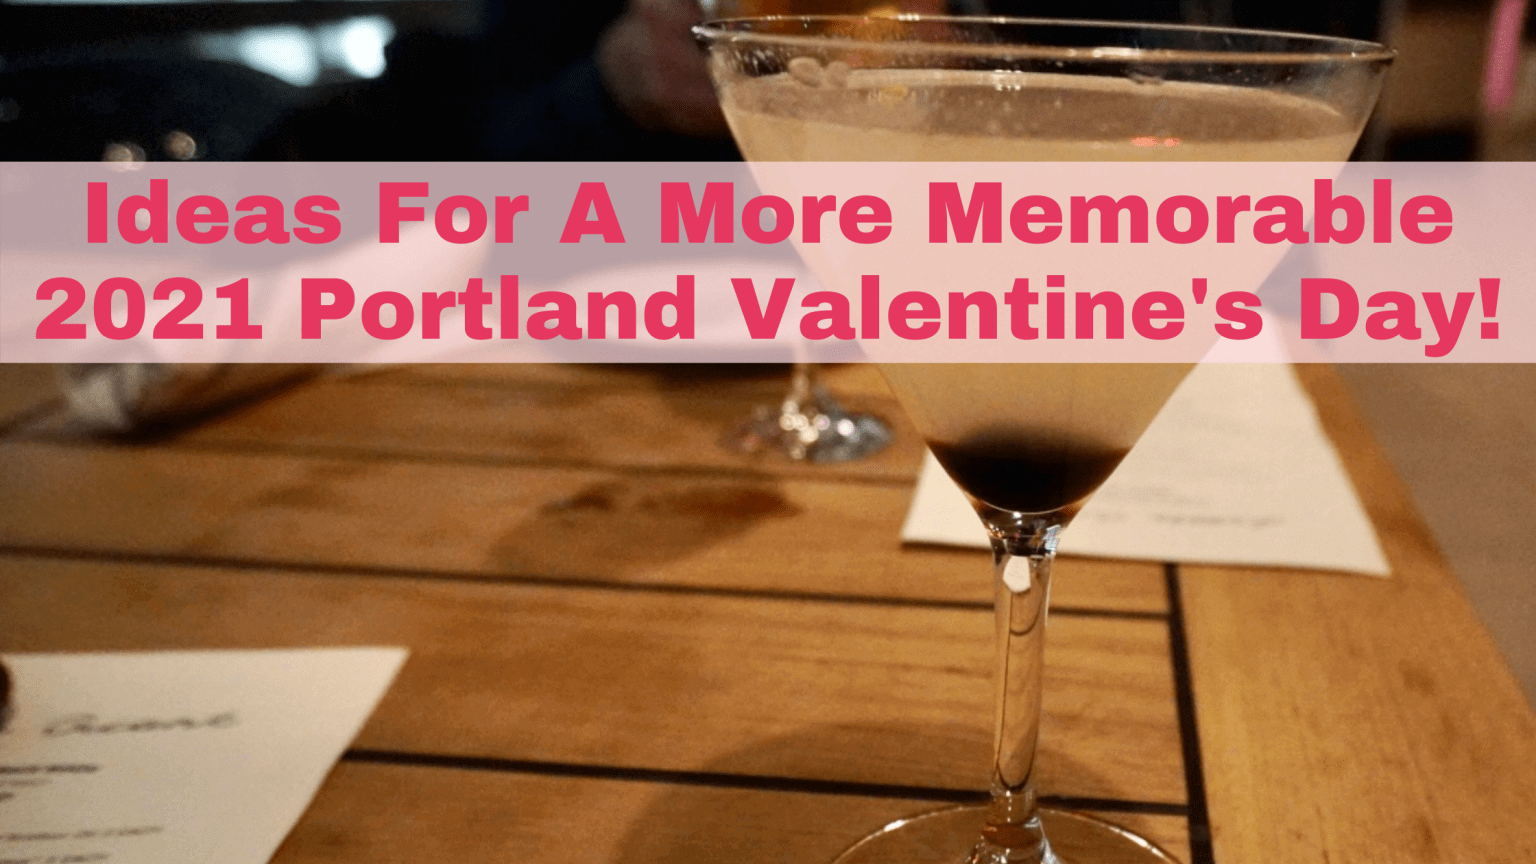 Ideas For A More Memorable 2021 Portland Valentine’s Day! 207 Foodie